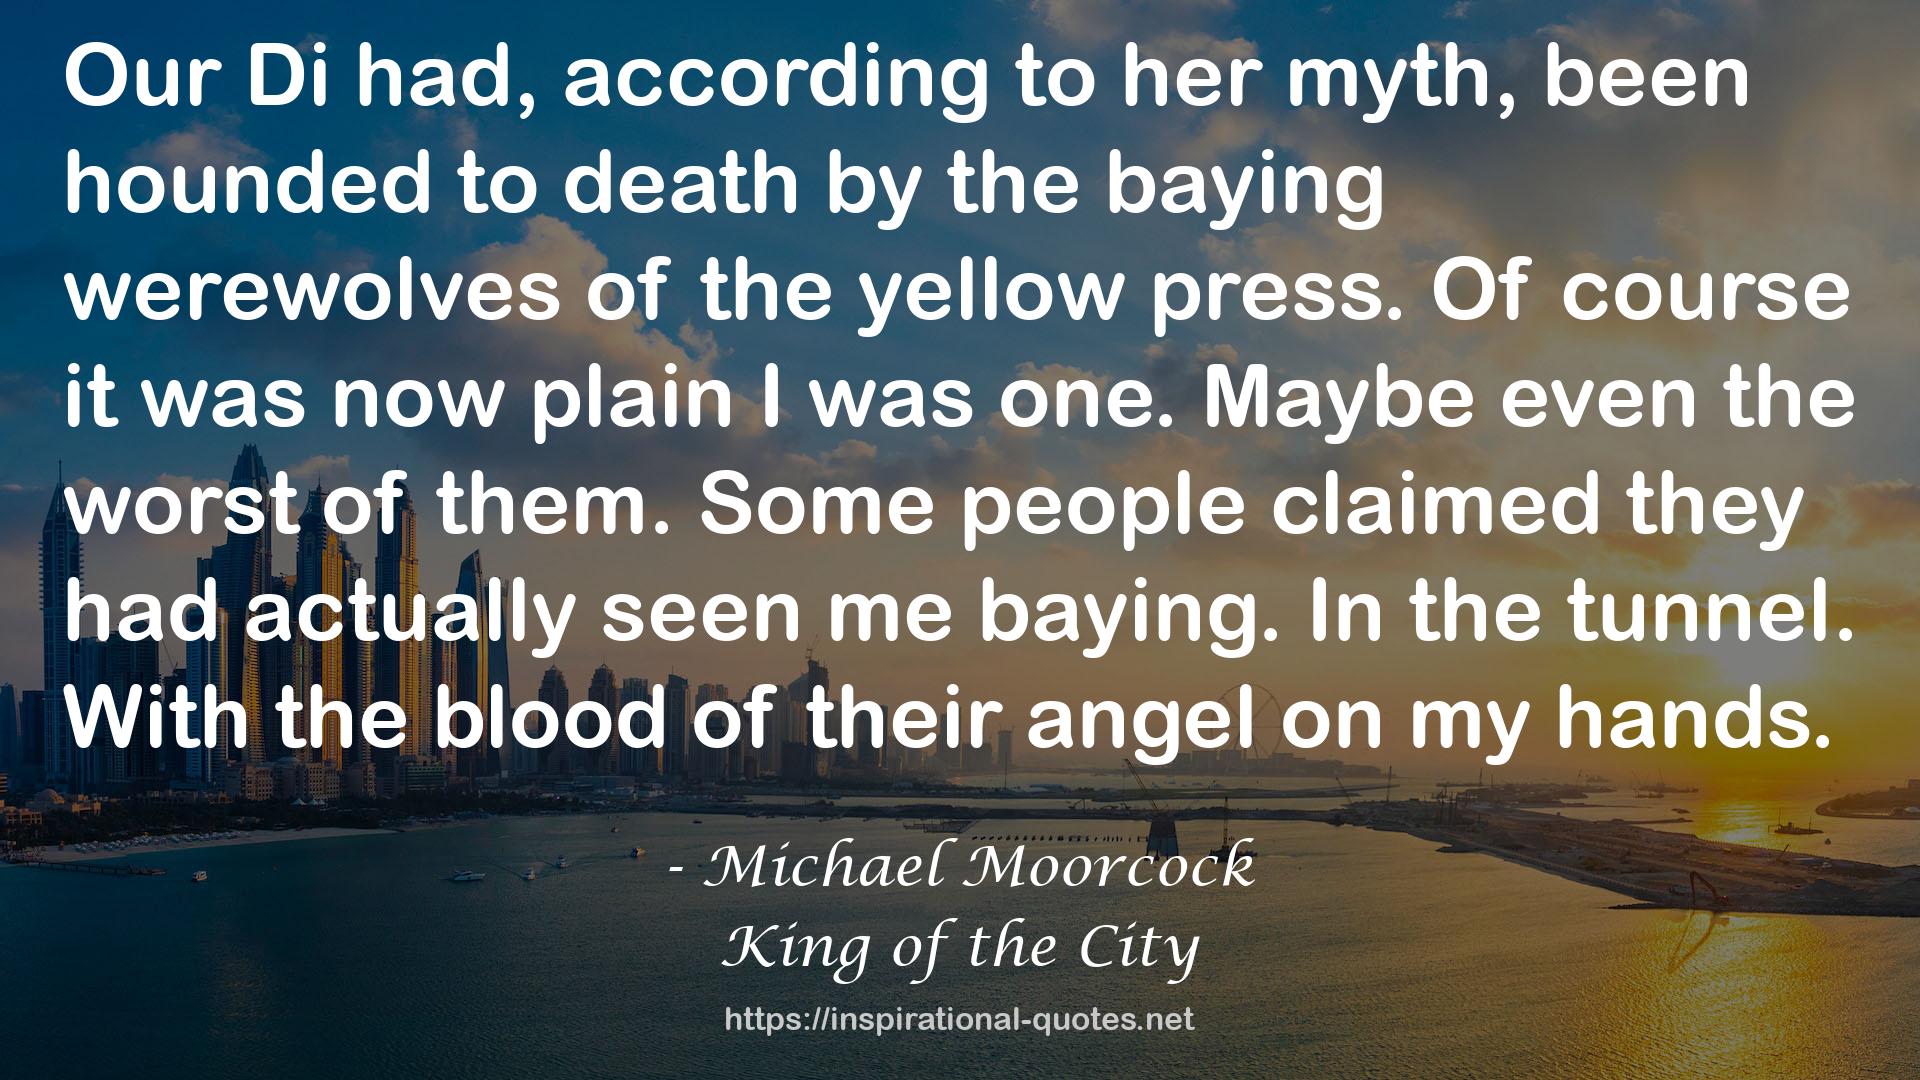 King of the City QUOTES